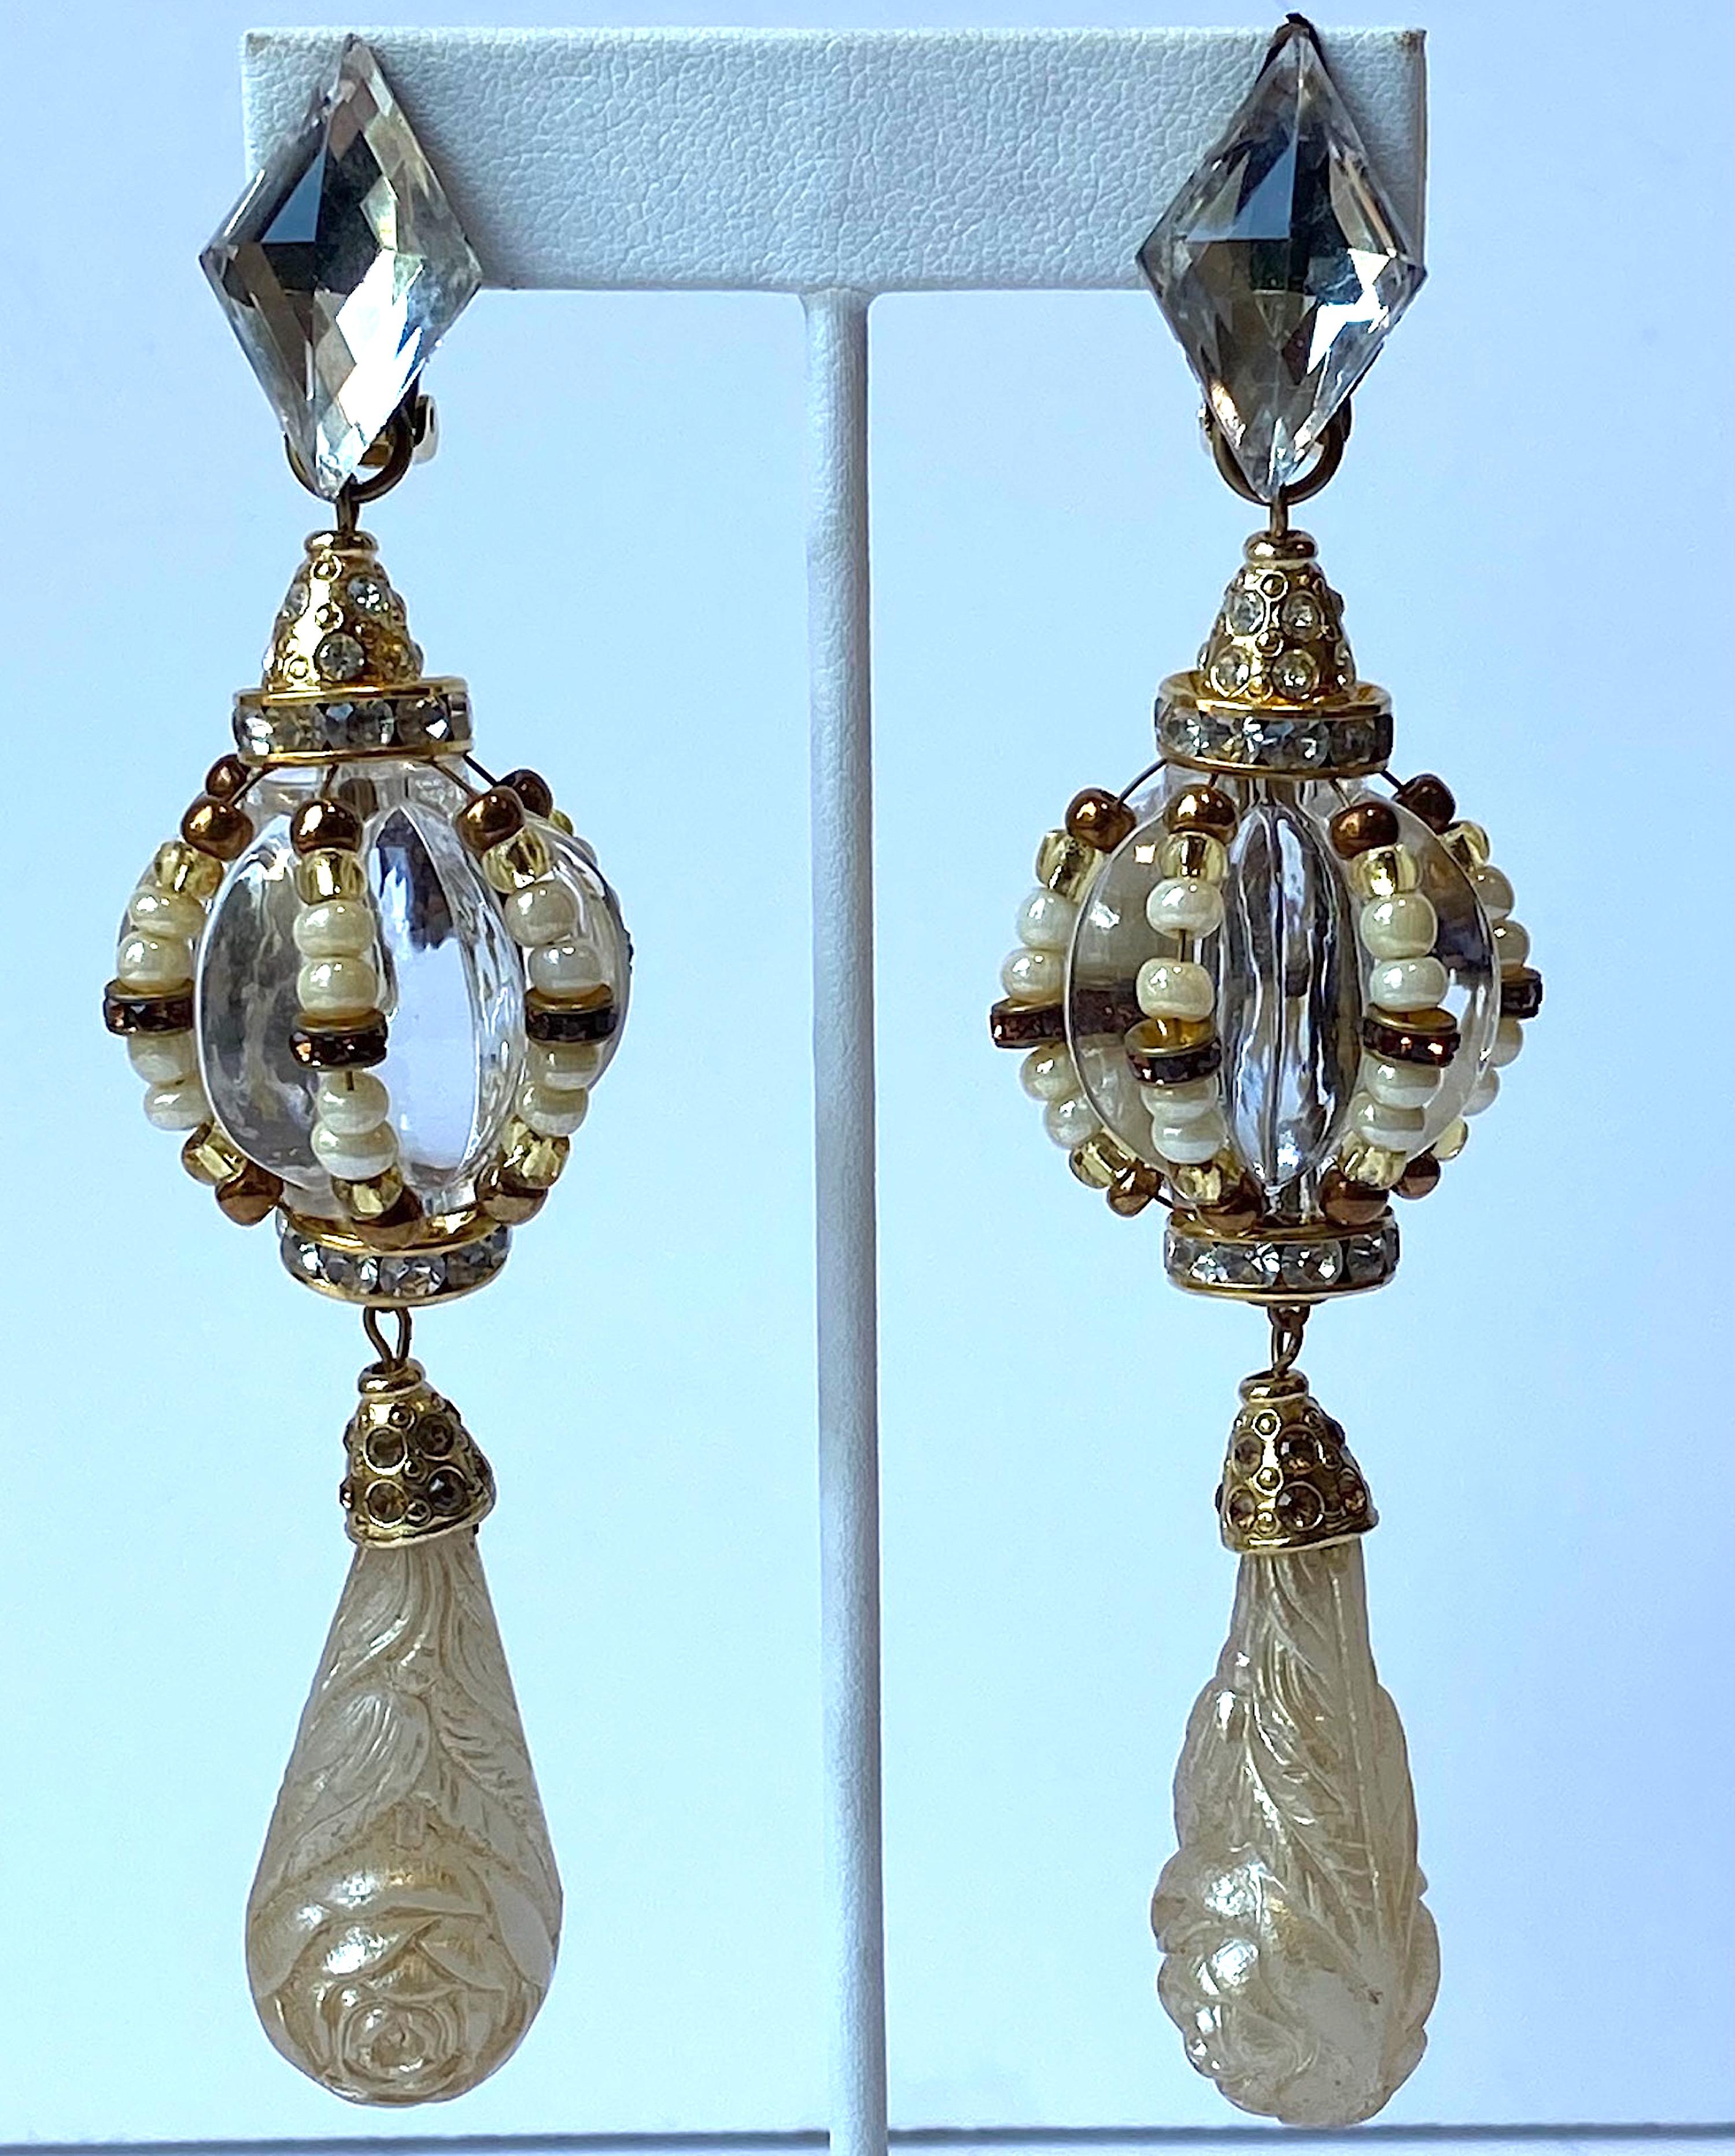 A true pair of statement earrings from the 1980s. Each measures 1.13 inches in diameter and 4.5 inches long. The earrings have a lucite faceted diamond top piece with clip back. Suspended from it is gold rhinestone cone on a rhinestone rondel and